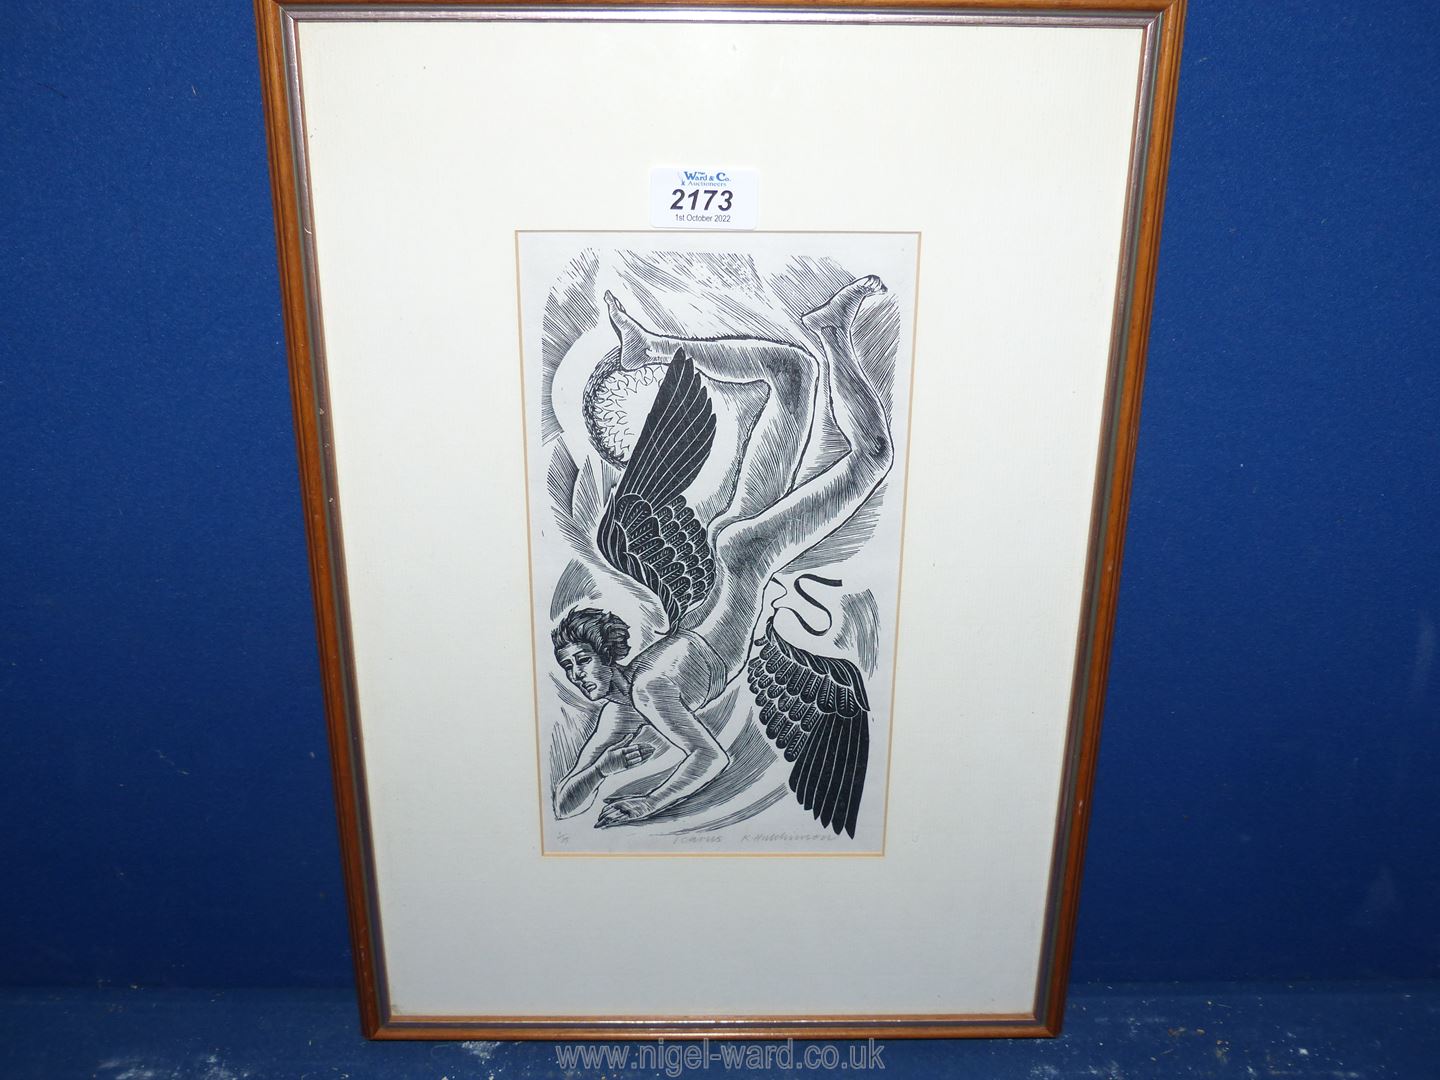 A framed and mounted plastic engraving (no. 1/35) titled 'Icarus', signed lower right 'K.